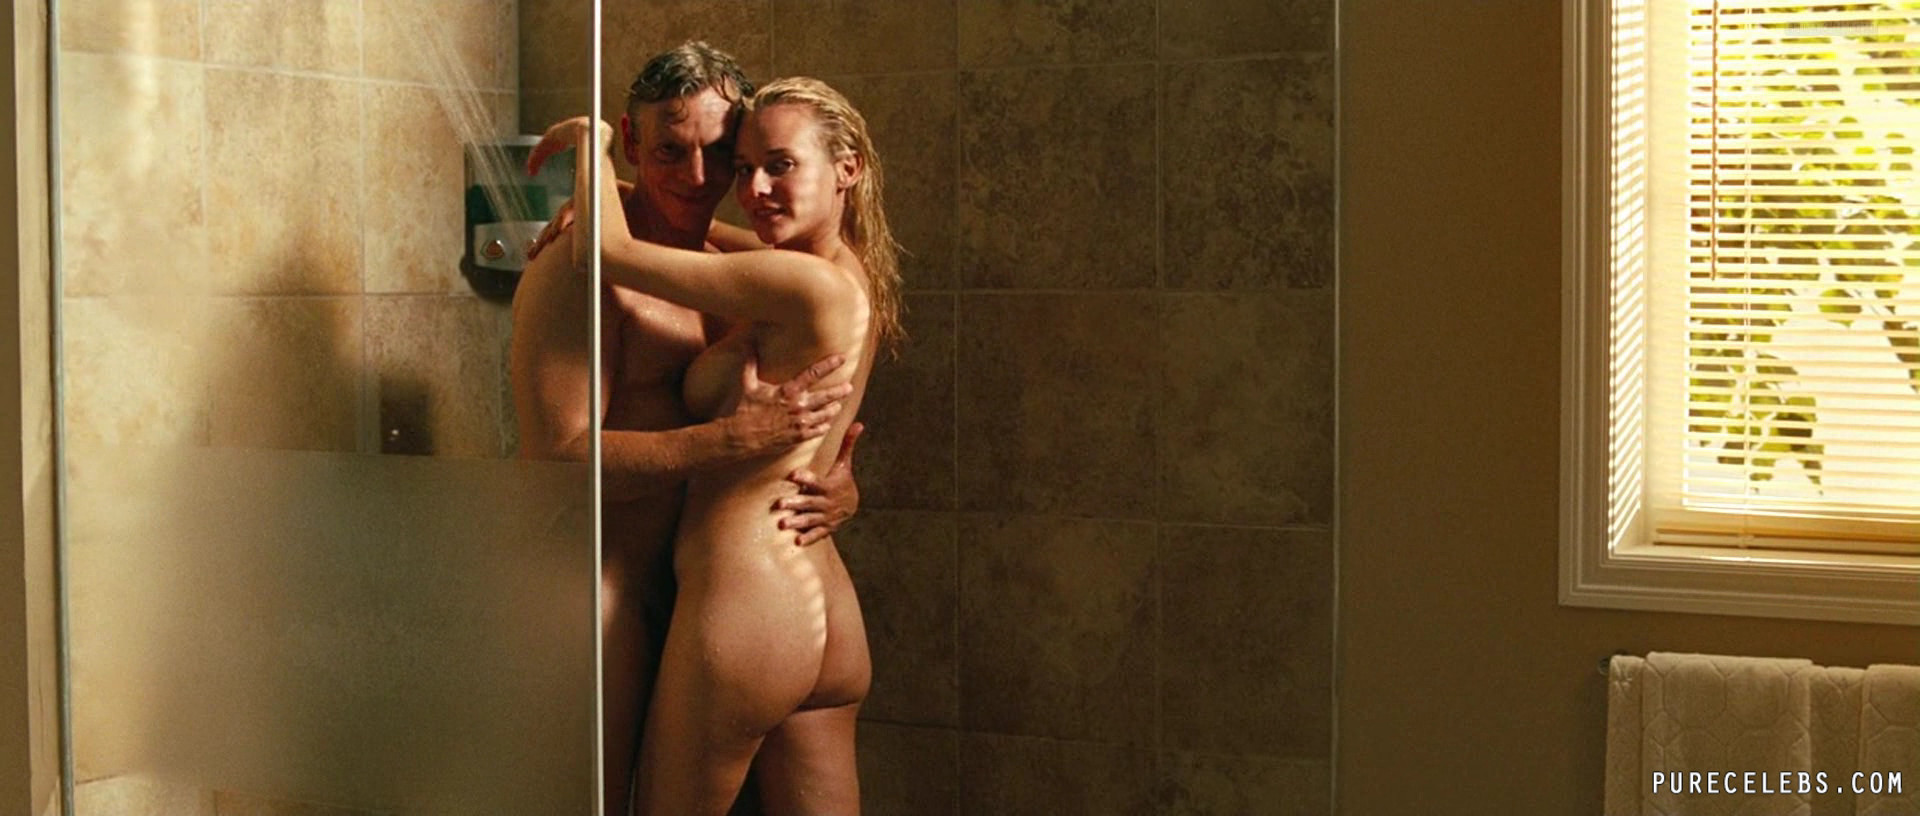 clint clinton recommends Diane Kruger Naked Photos